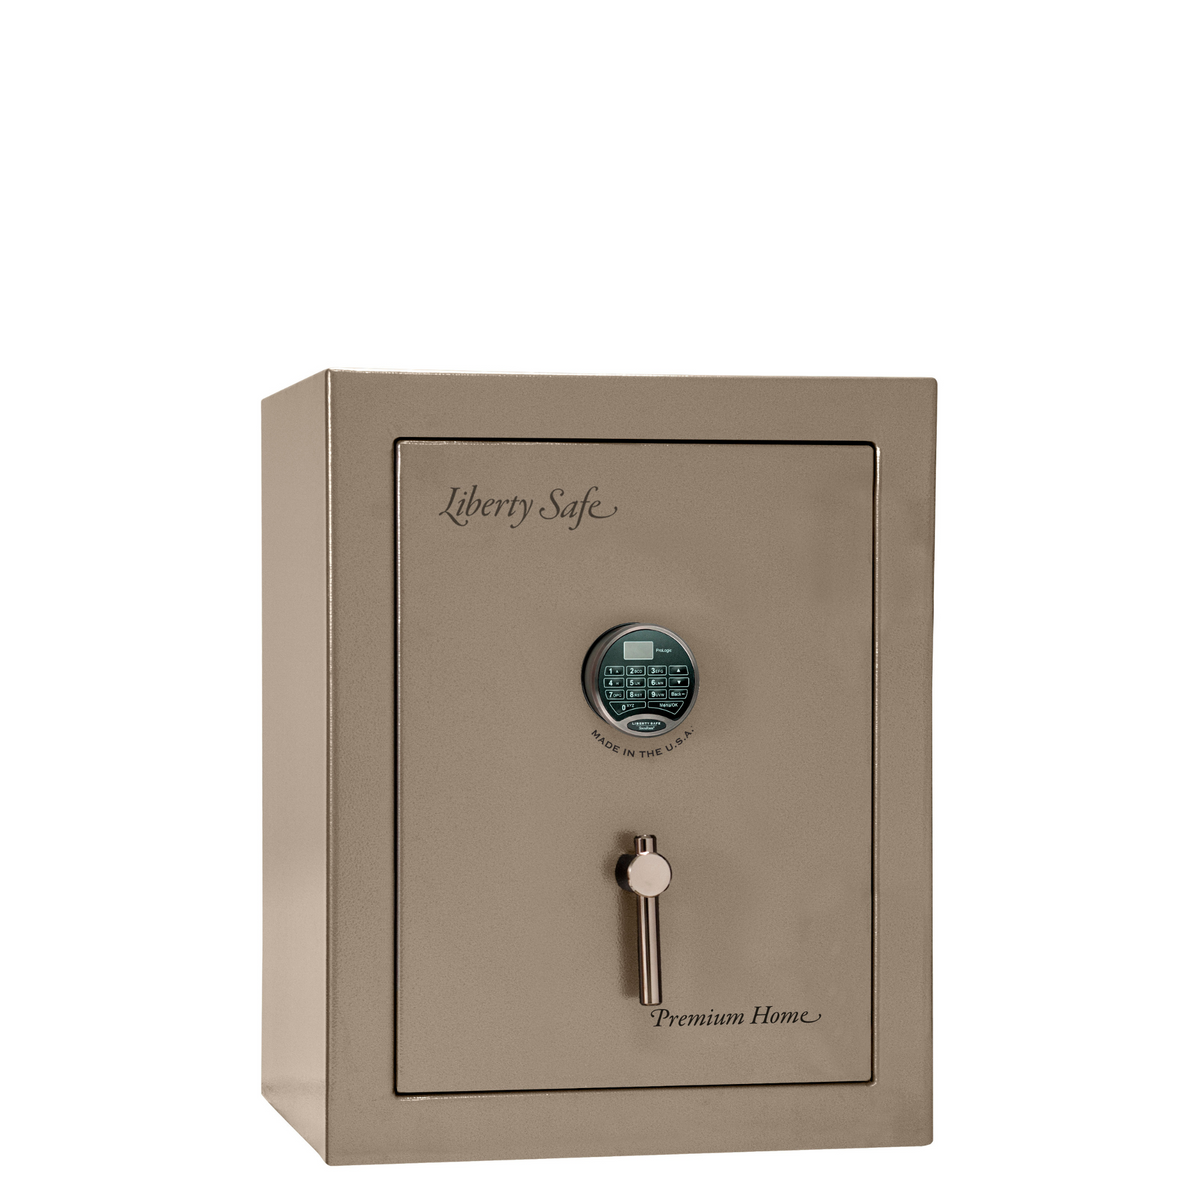 Premium Home Series | Level 7 Security | 2 Hour Fire Protection | 08 | Dimensions: 29.75&quot;(H) x 24.5&quot;(W) x 19&quot;(D) | Champagne Marble - Closed Door